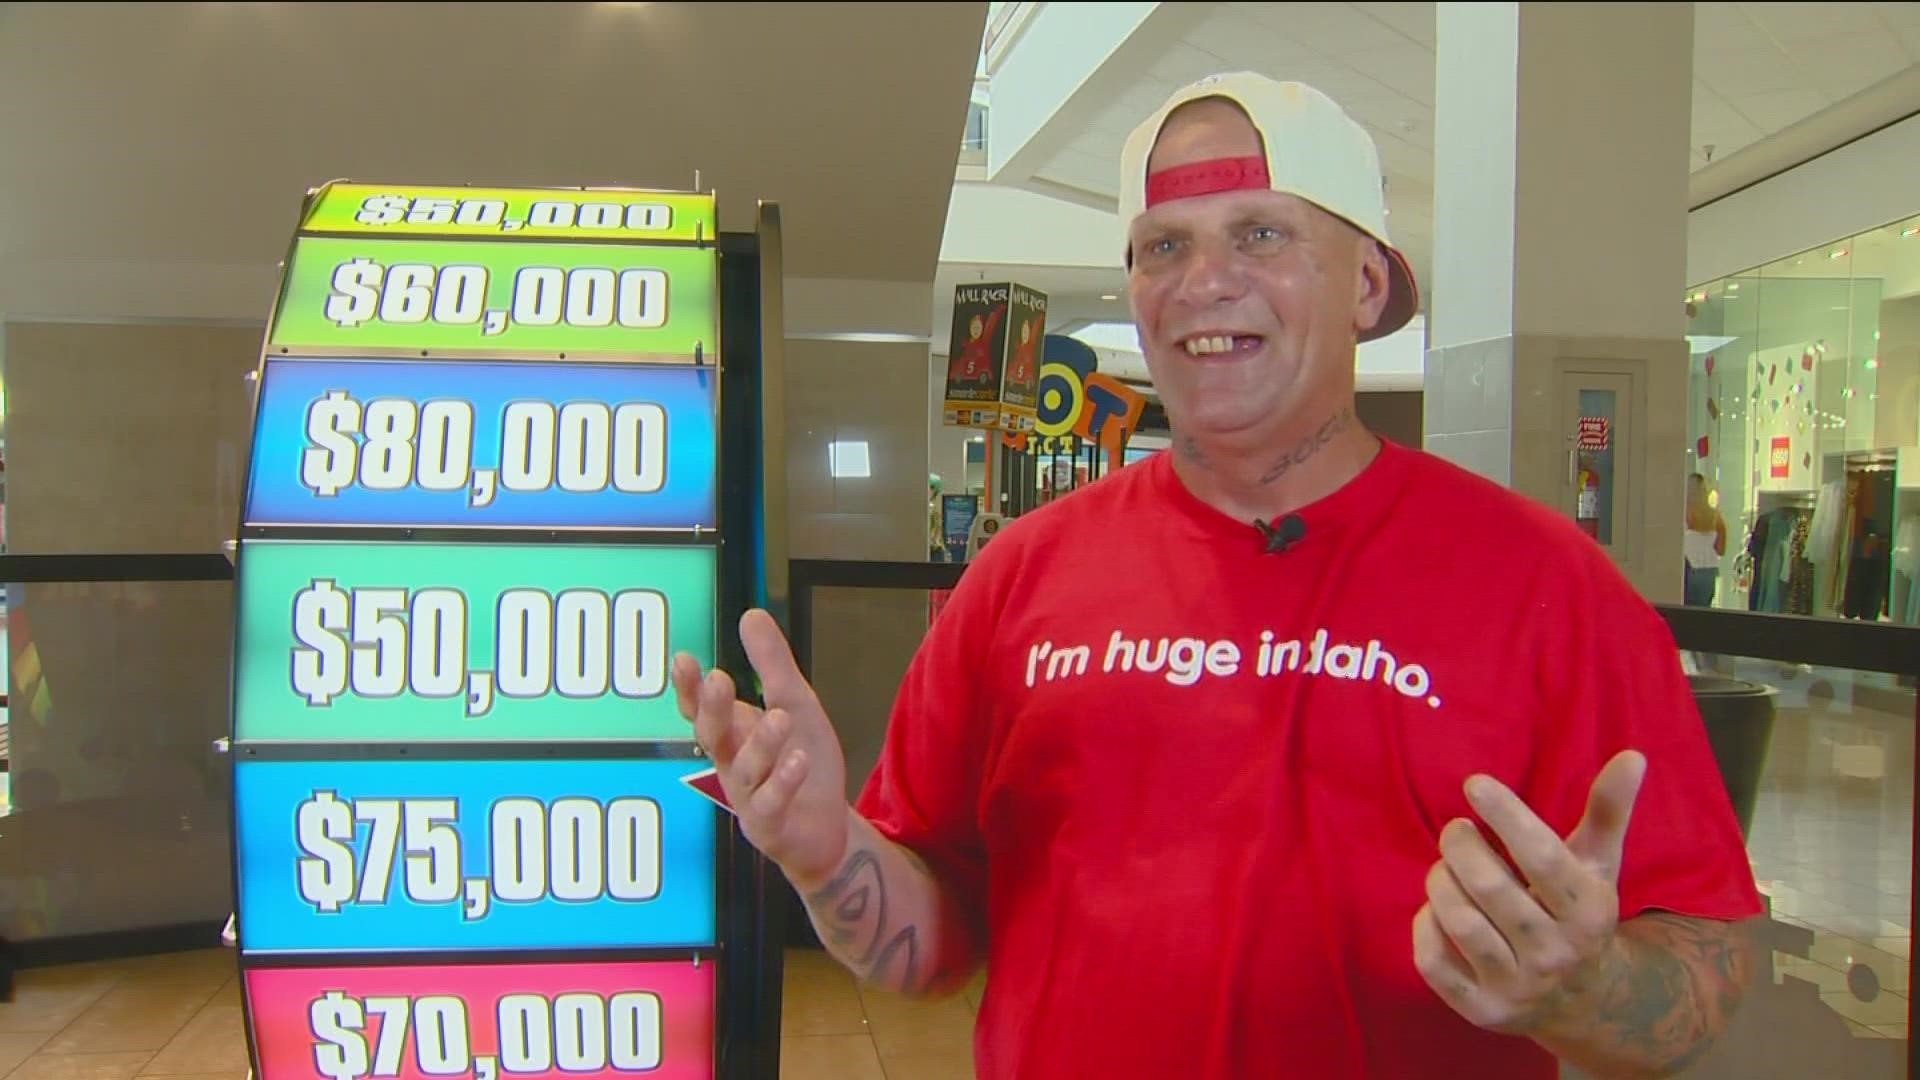 The Big Spin Winner Event gives previous Idaho Lottery winners the chance to win up to $100,000 by spinning a 6 ft wheel.